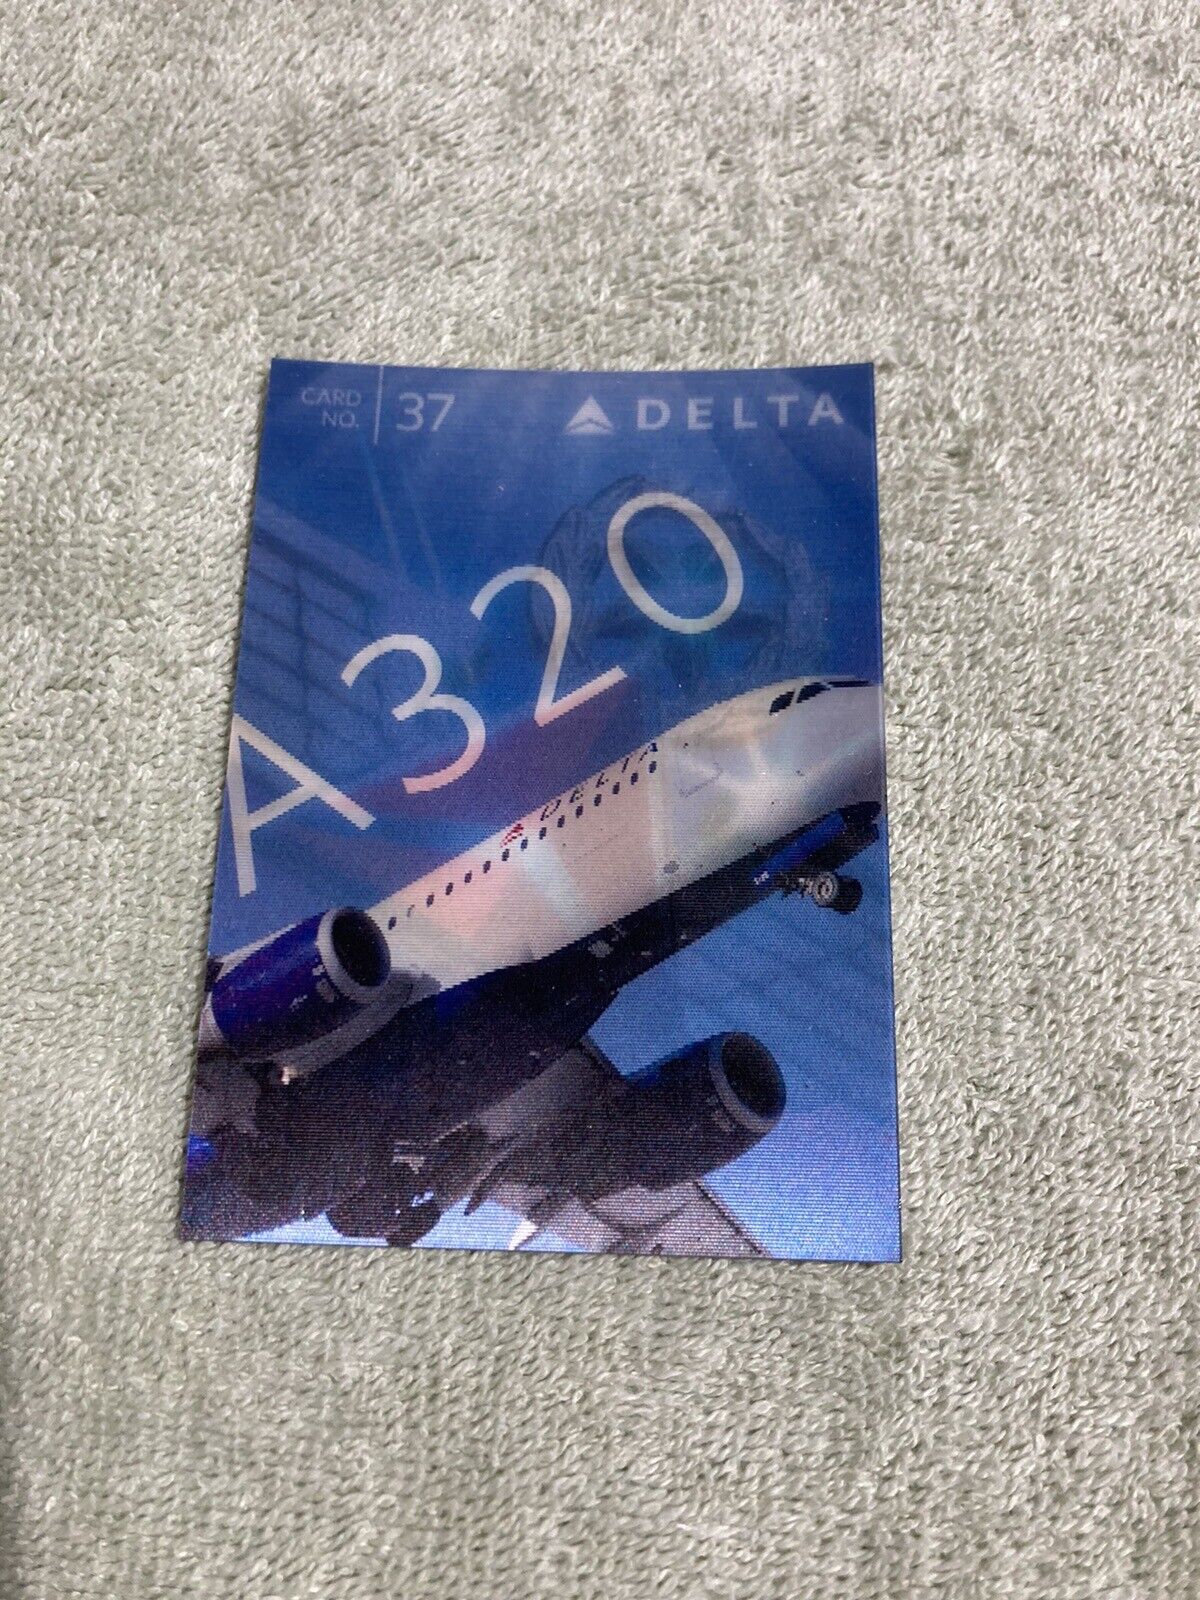 Delta Air Lines Airbus A320 2015 Pilot Trading Card #37 Holographic Collect HOLO